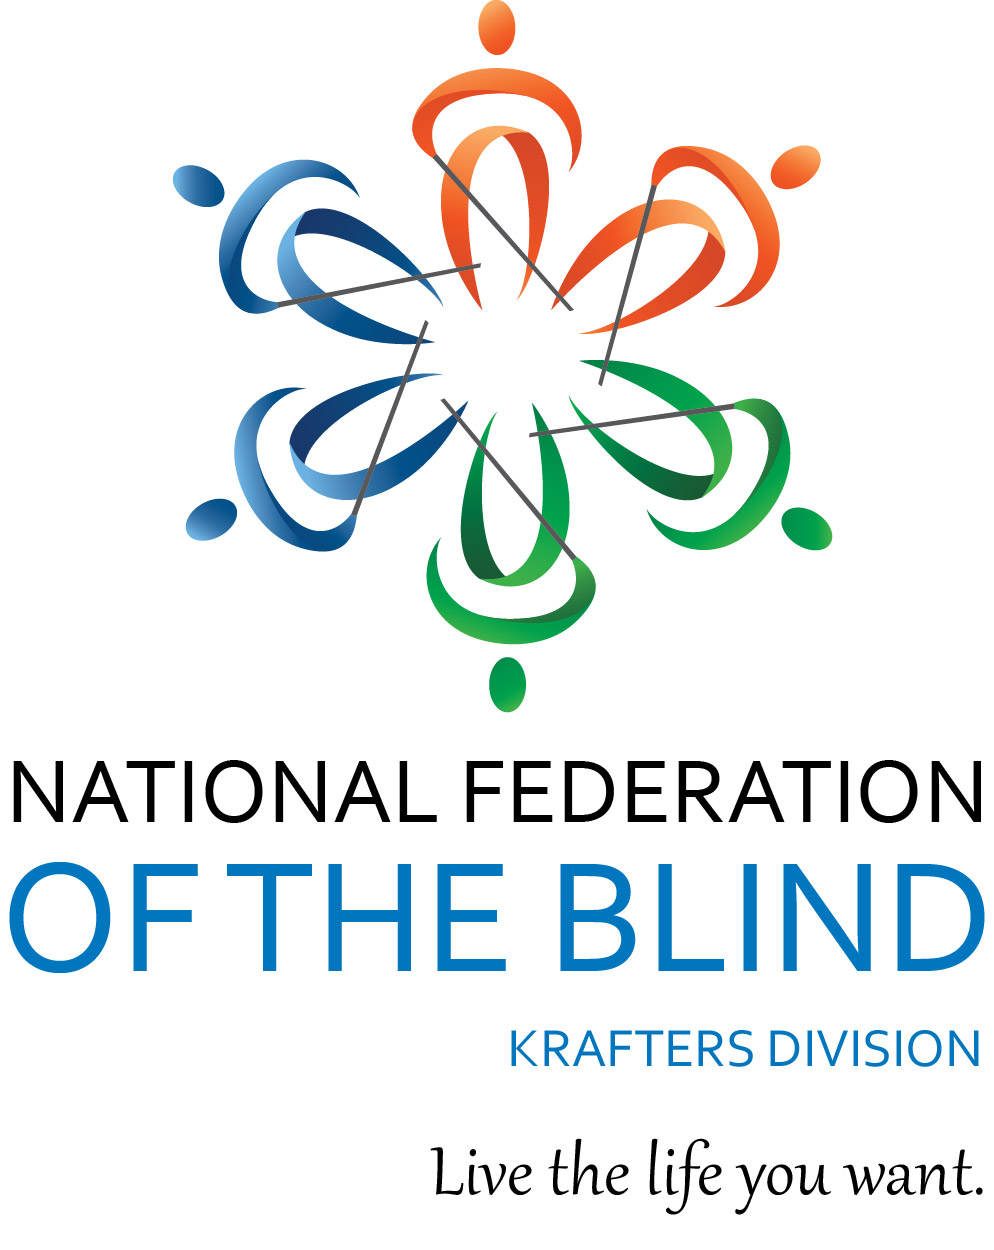 NFB Krafters division logo